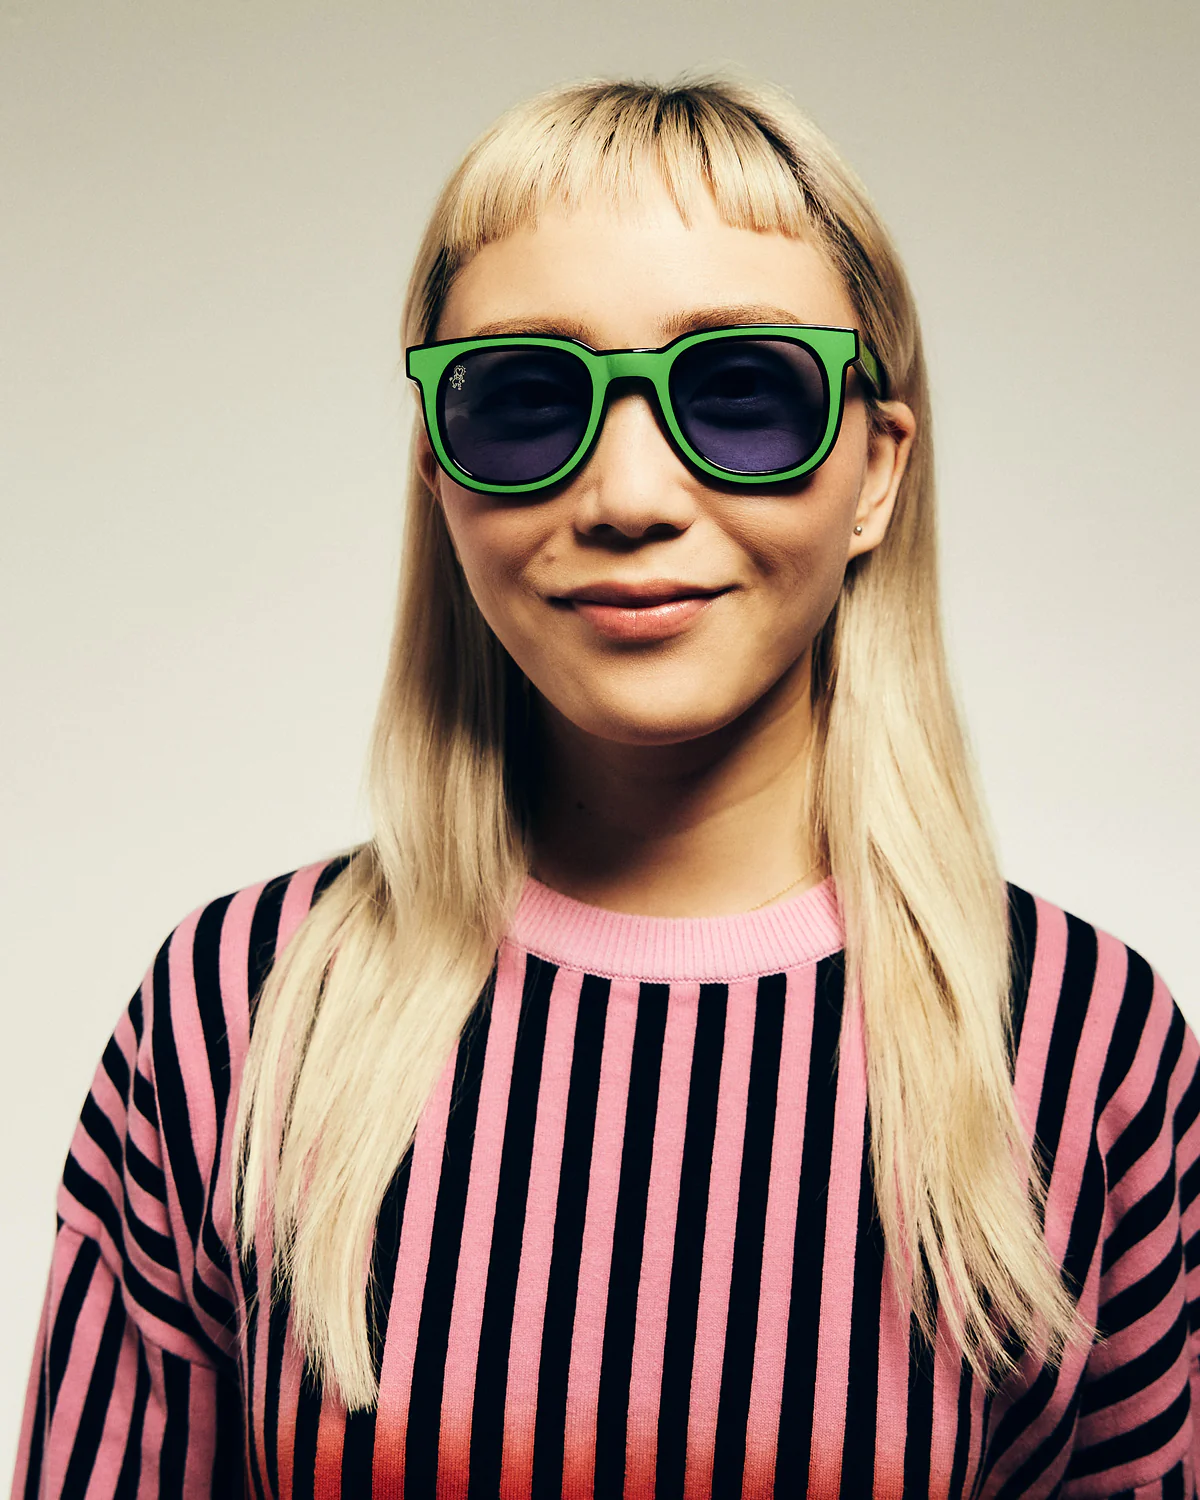 Keith Haring's Iconic Art Inspires AKILA's Exclusive Eyewear Collection